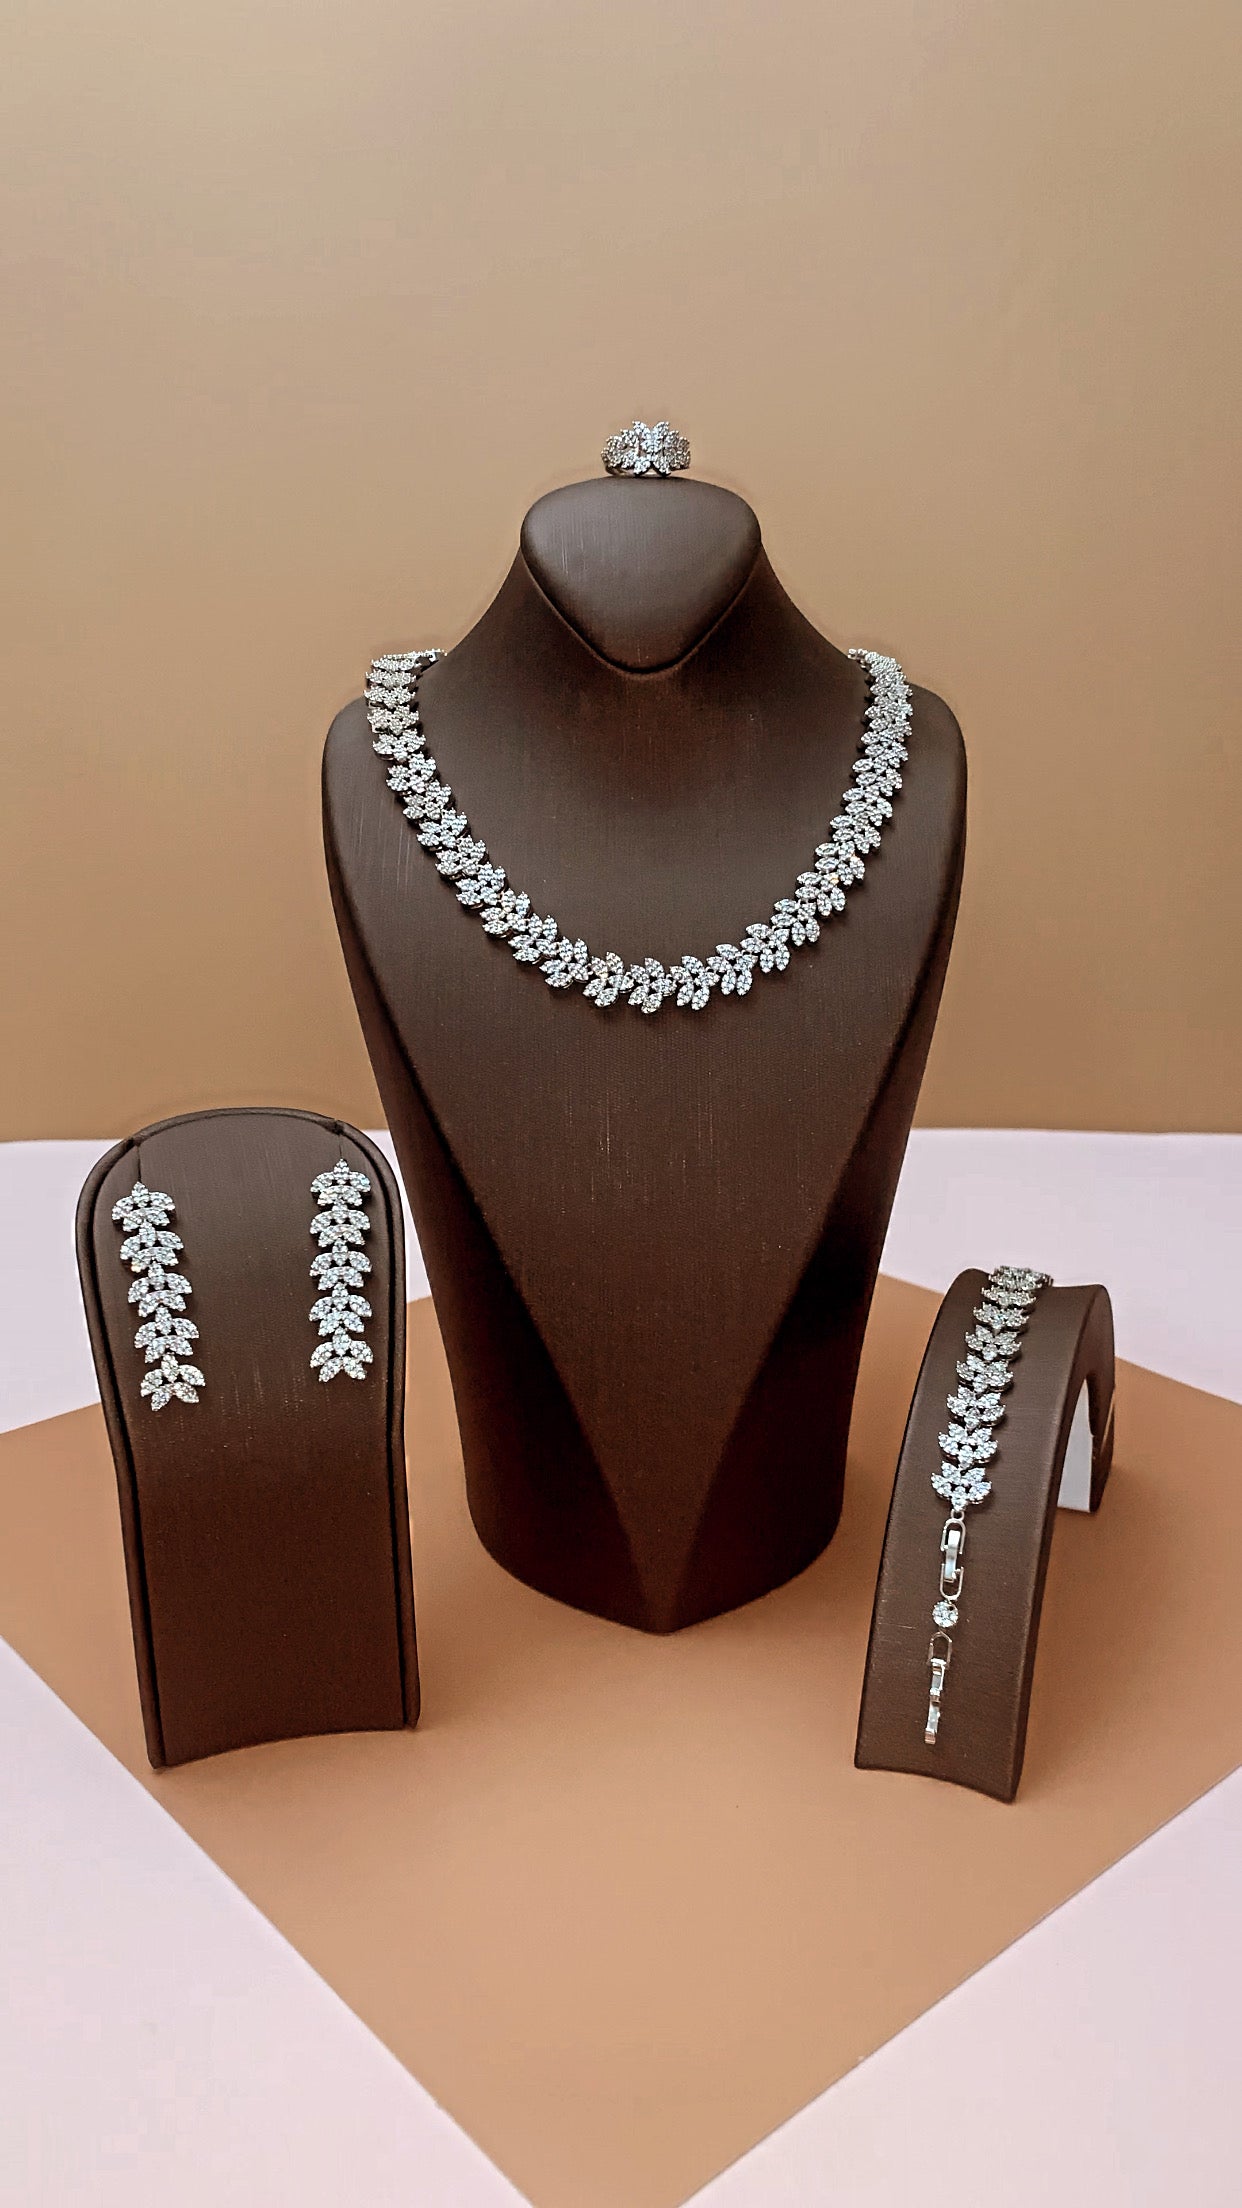 GODDESS Jewelry Set with Necklace, Bracelet, Drop Earrings, and Ring - SAMPLE SALE